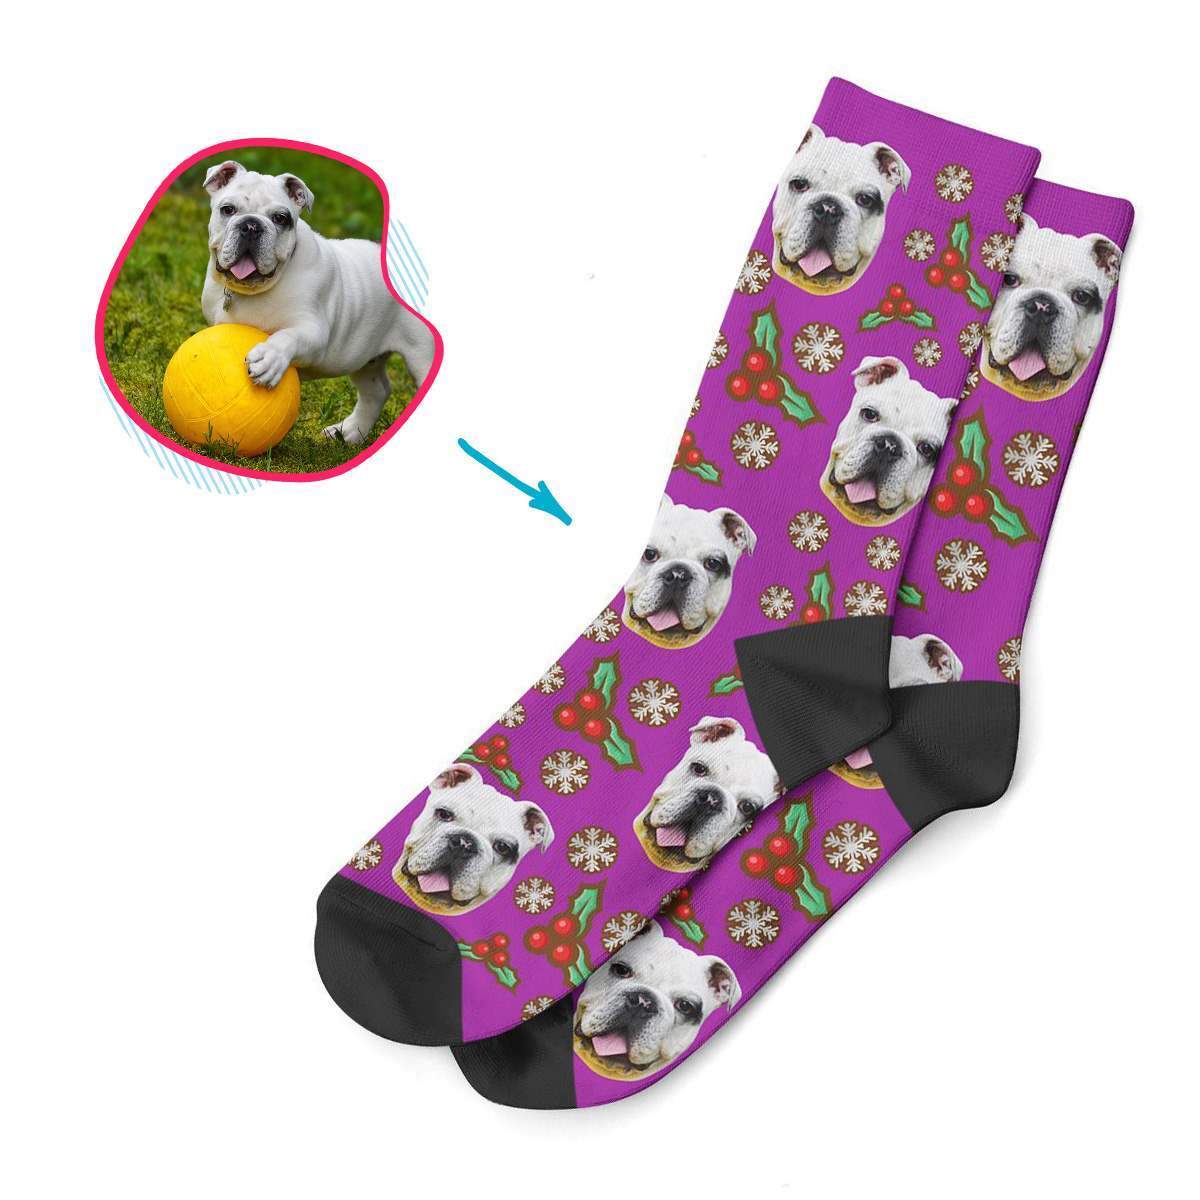 purple Mistletoe socks personalized with photo of face printed on them